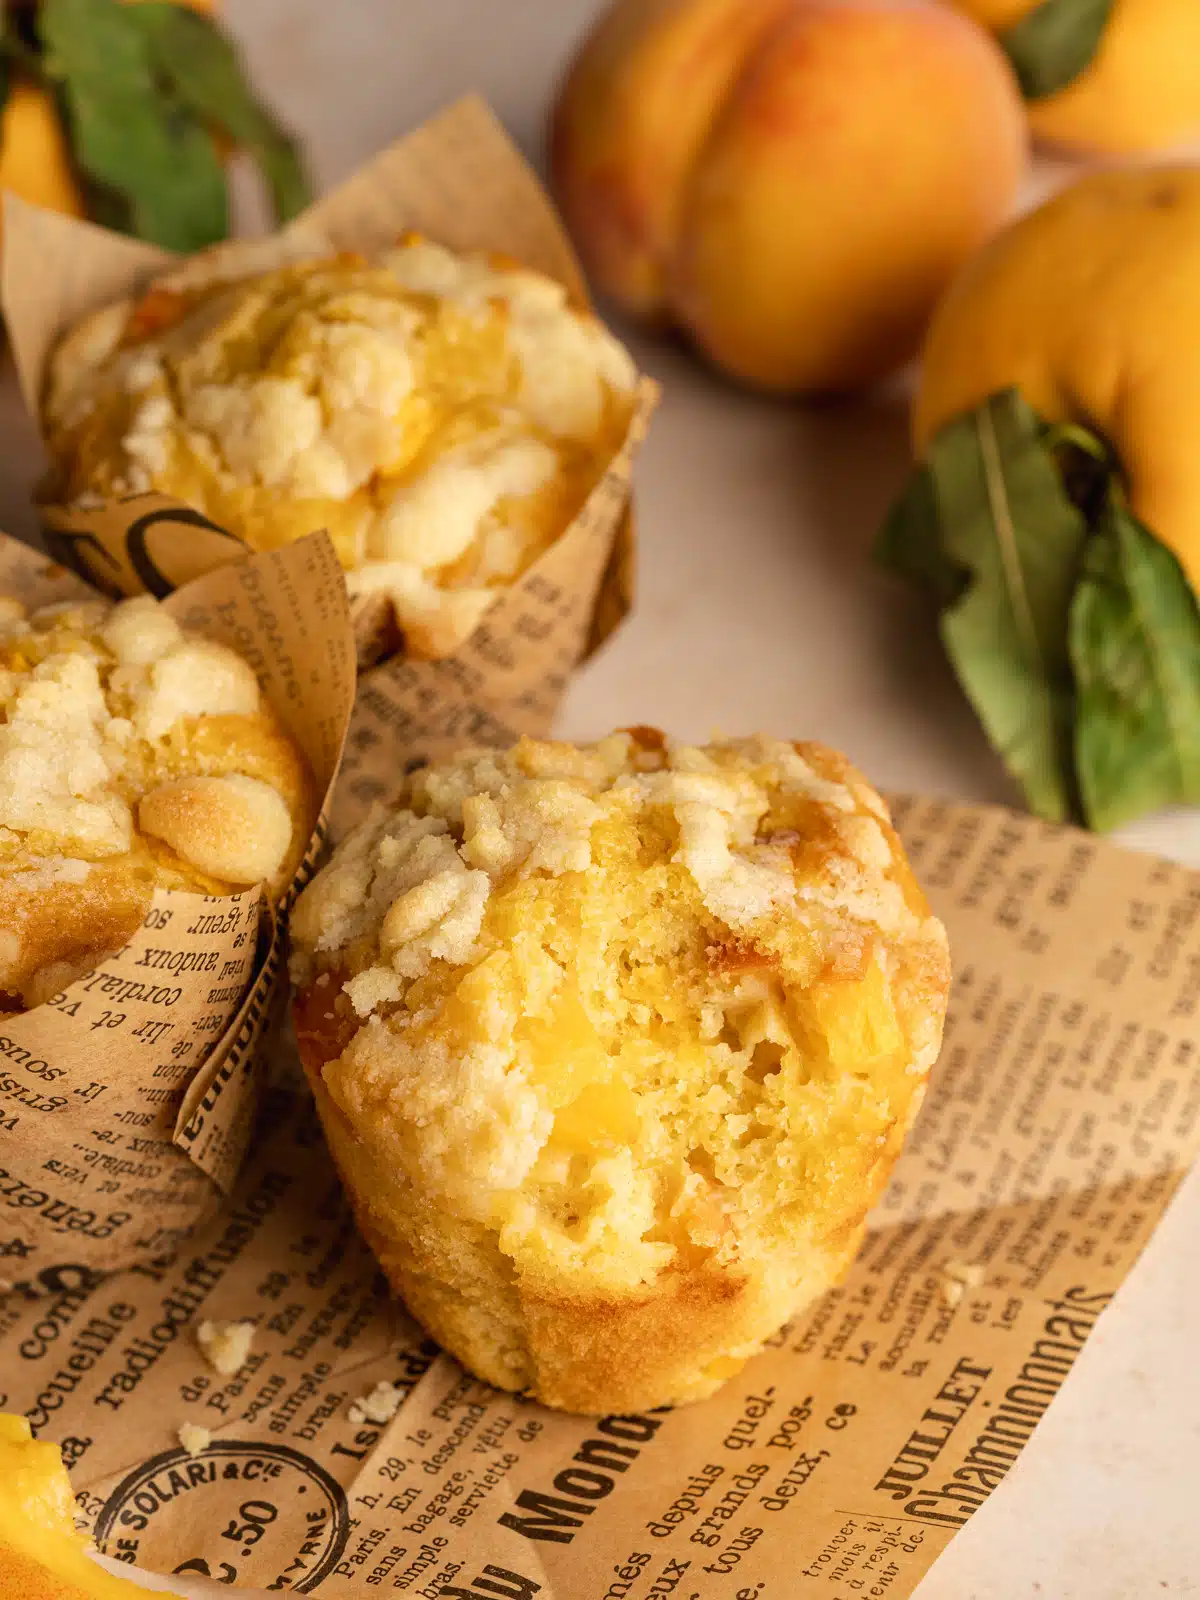 peach muffins with crumb topping on a sheet of brown newspaper with fresh peaches in the background.